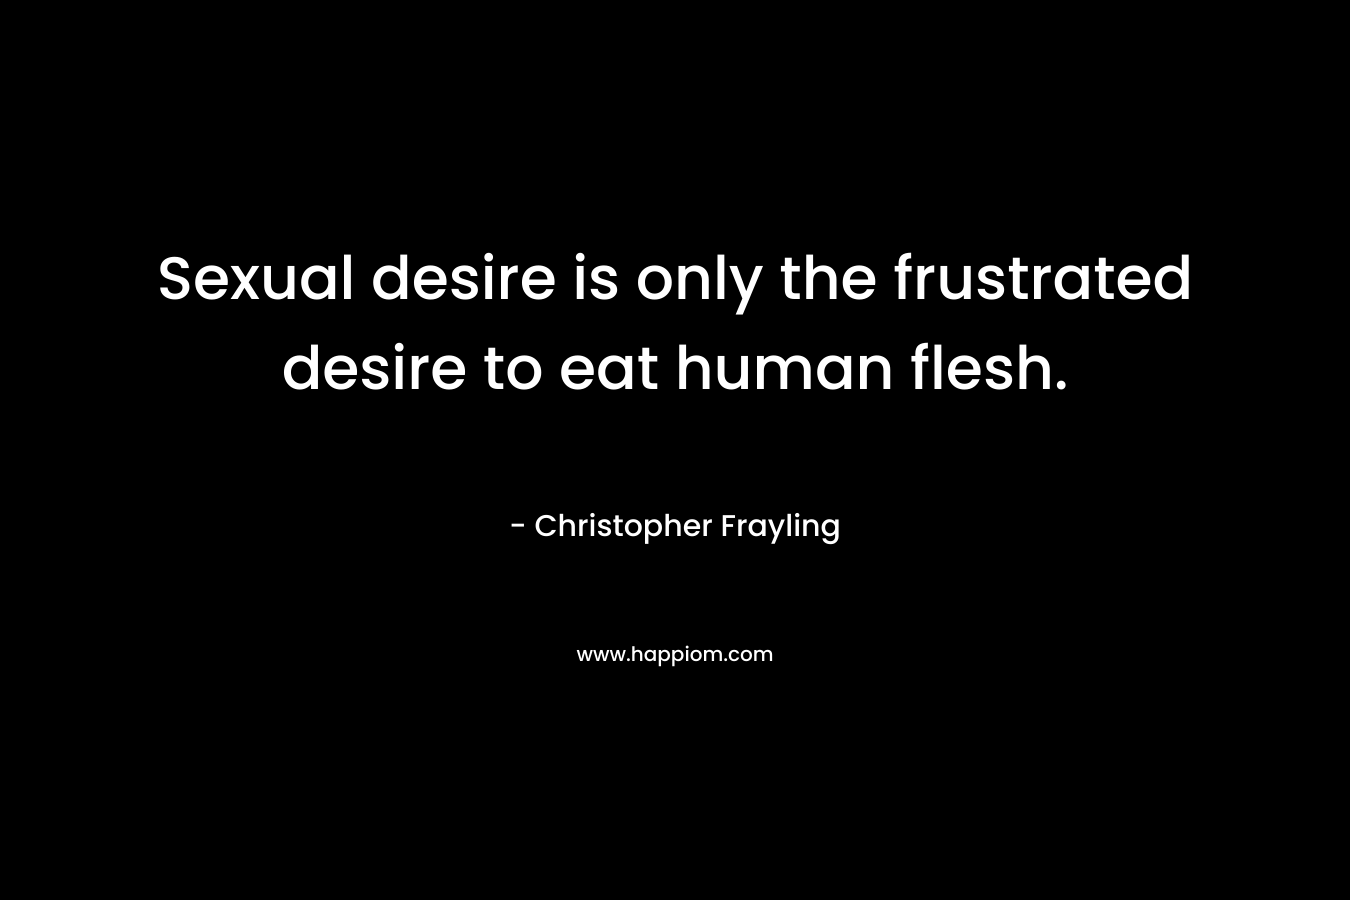 Sexual desire is only the frustrated desire to eat human flesh.